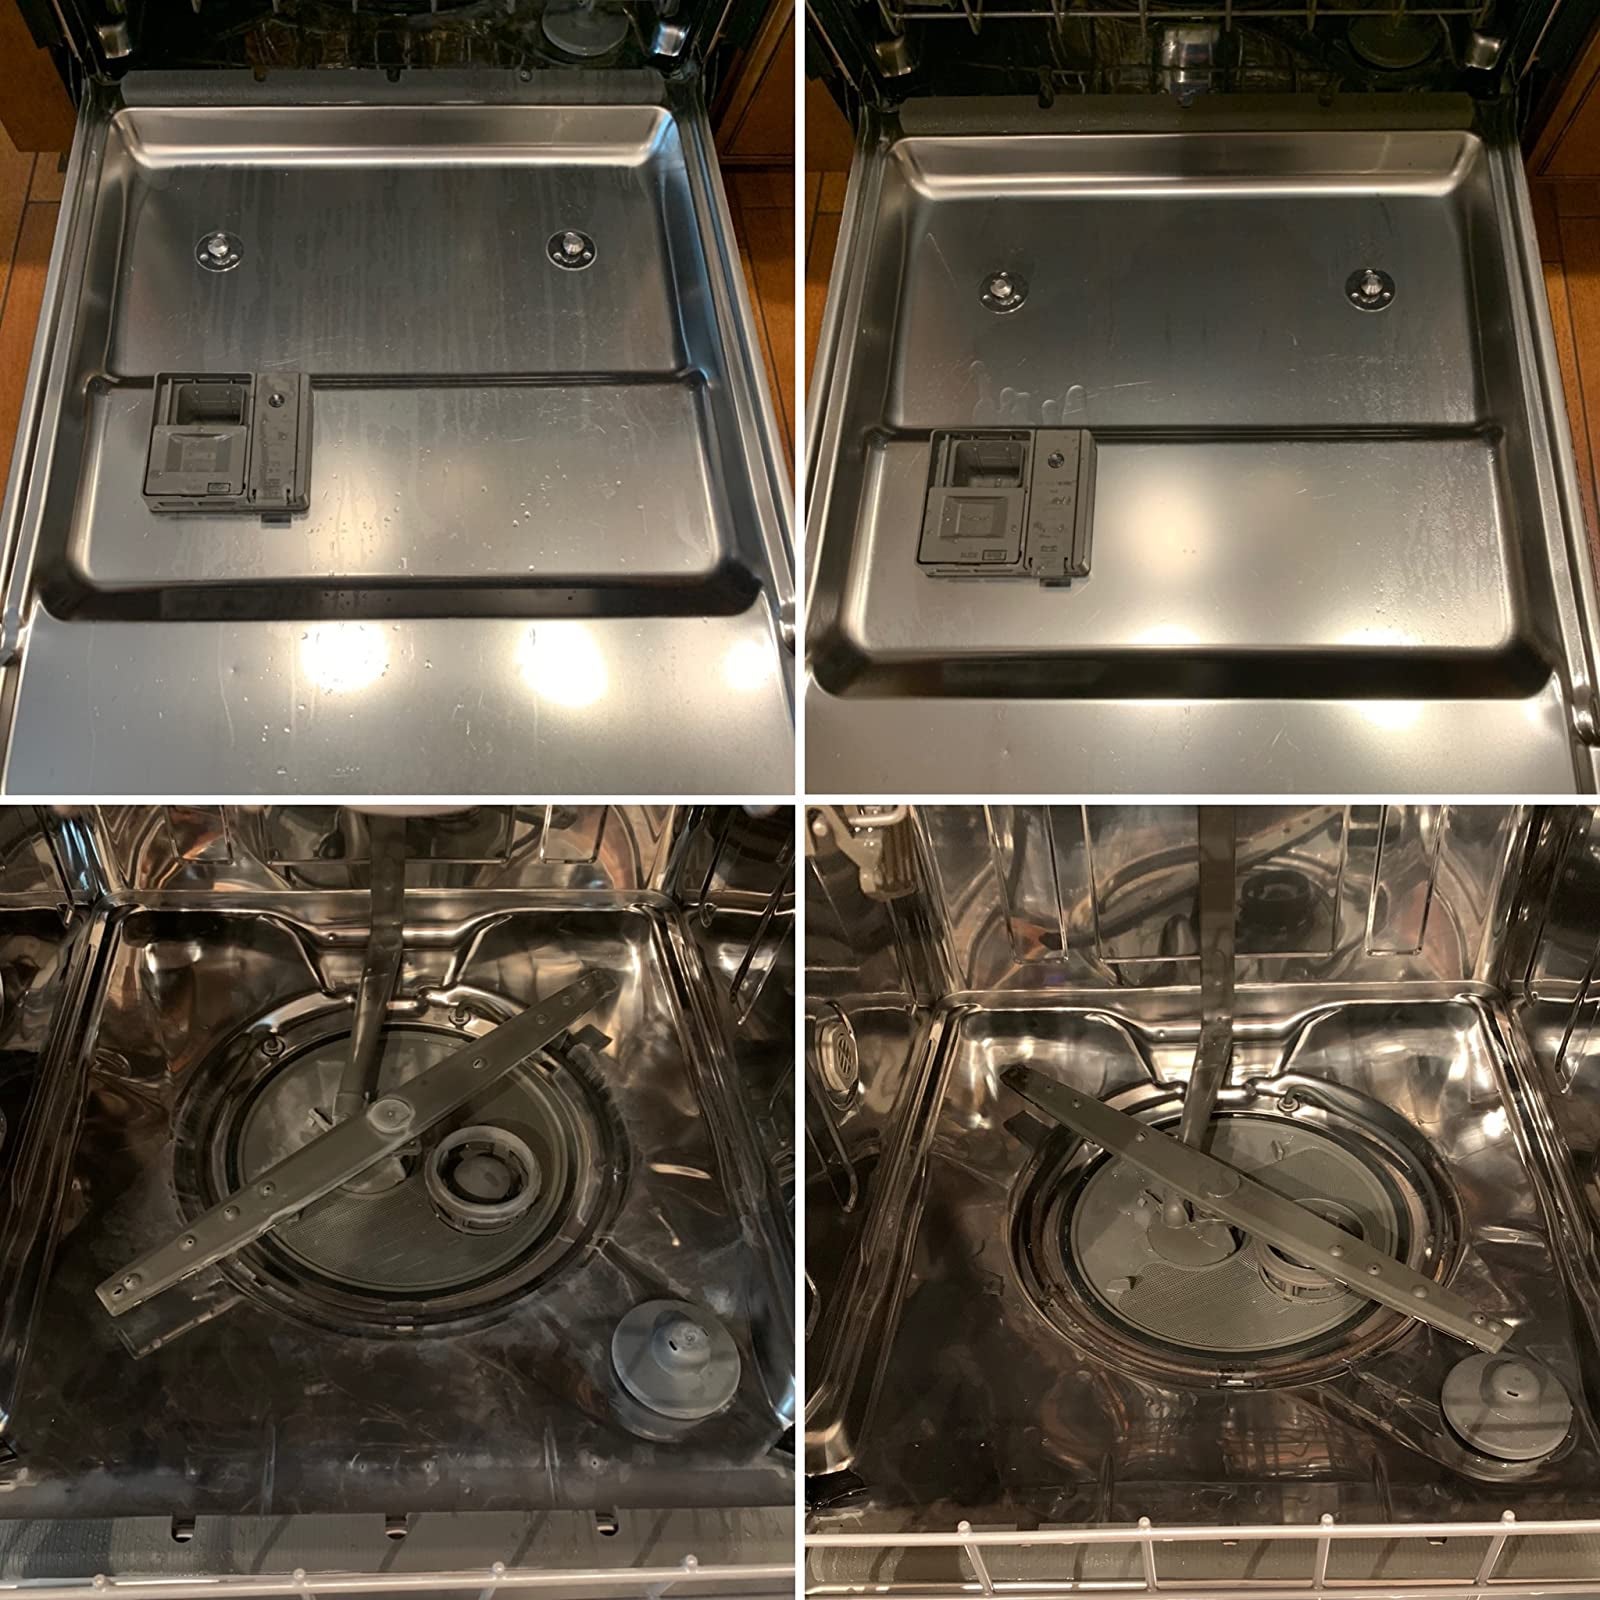 Reviewer image of the door and inside of a dishwasher before and after being cleaned with the product